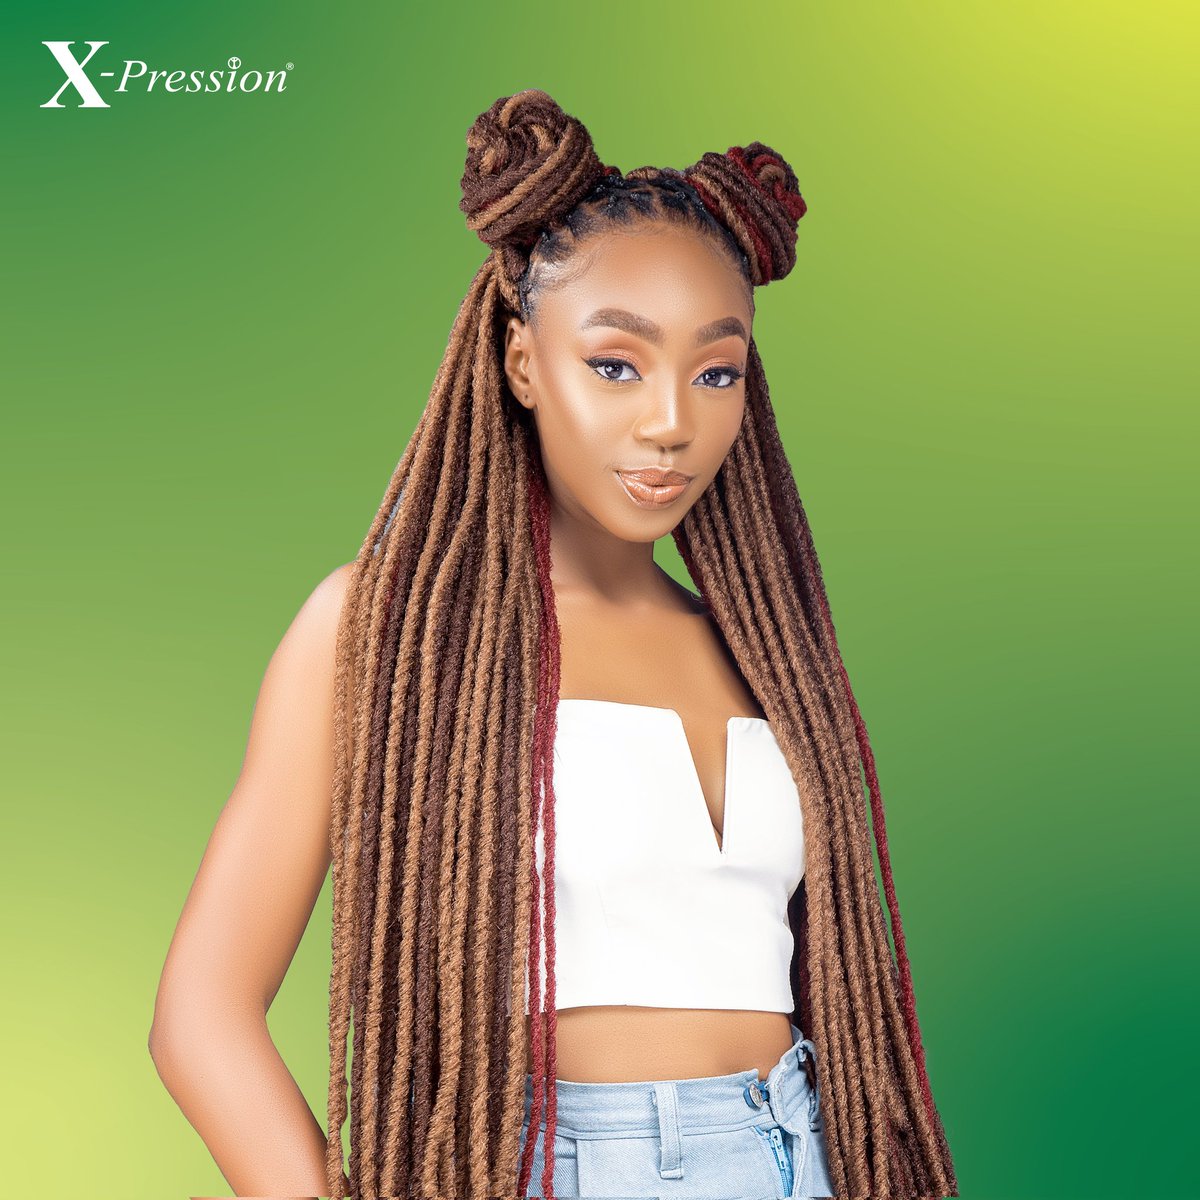 Unlocking Gorgeous Hair Goals, One Weekend at a Time! 

If you're feeling adventurous, why not experiment with vibrant BAHAMA LOCS this weekend? 

#xp4you #xpression #xpressionhair #BahamaLocs #bahama #weekend #style #braids #hairstyles #fashion #beauty #braidedhairstyles